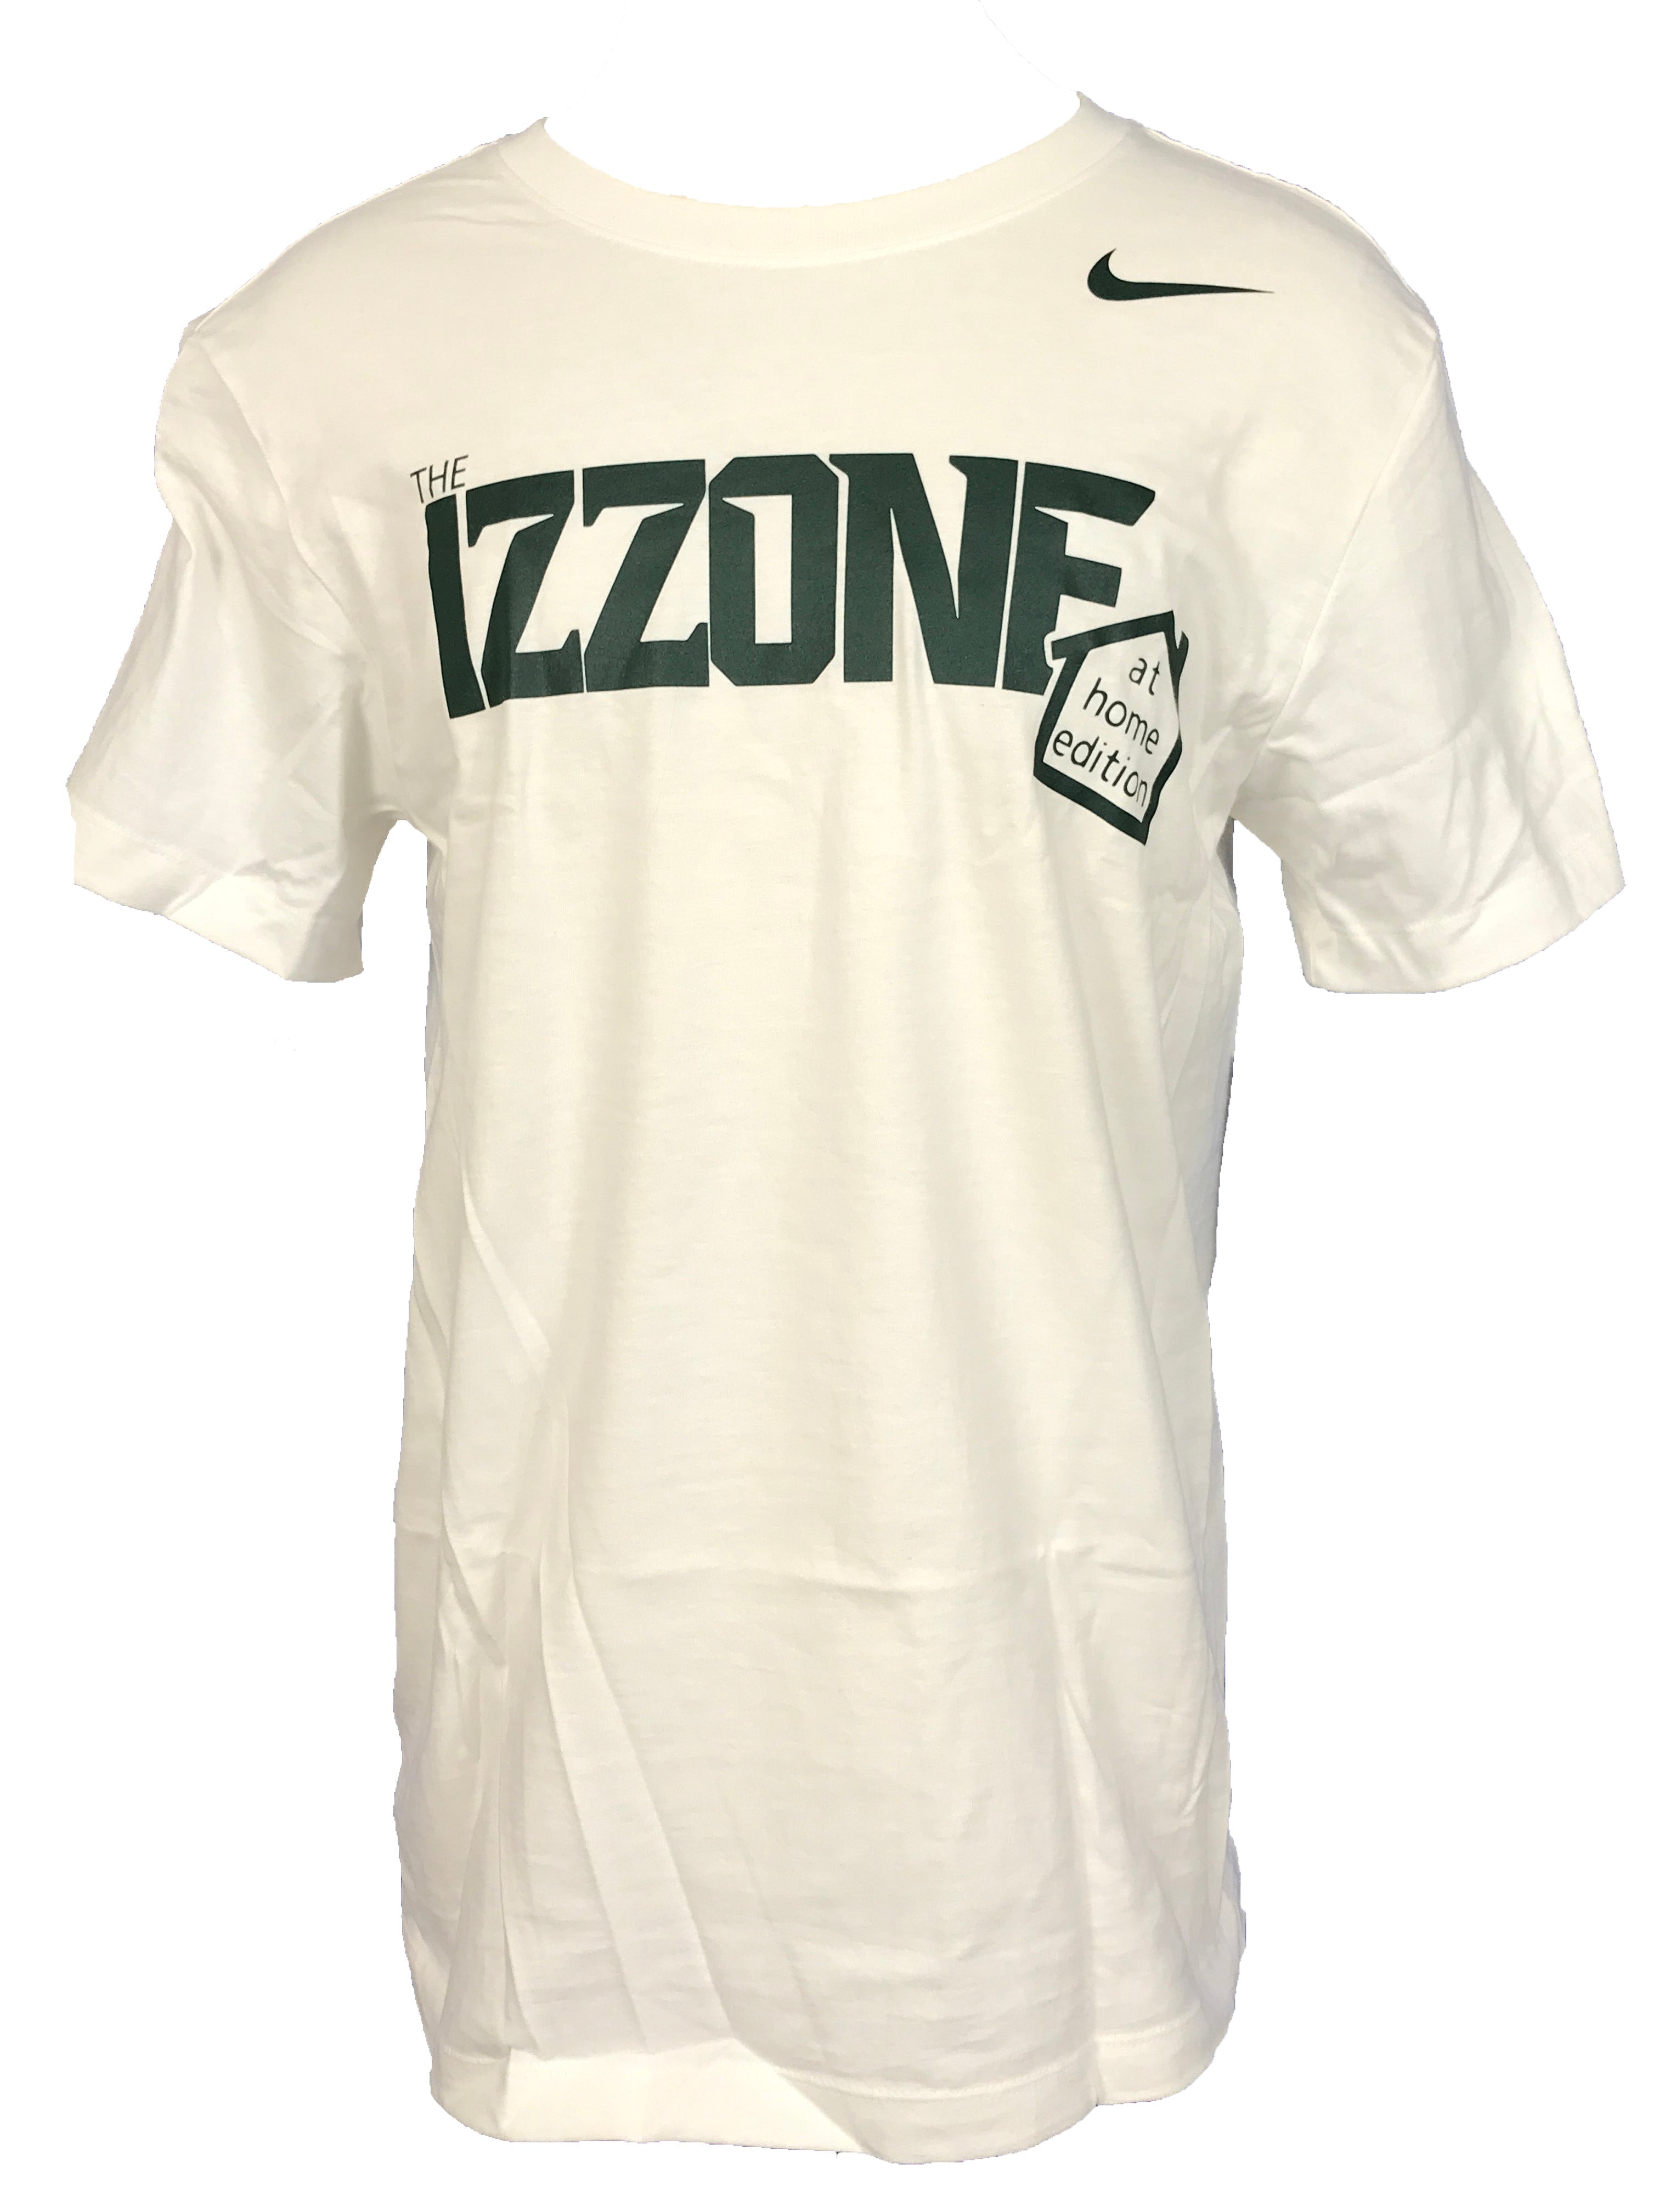 Nike White 2020 The Izzone At Home Edition MSU Basketball T-Shirt Men's Size M